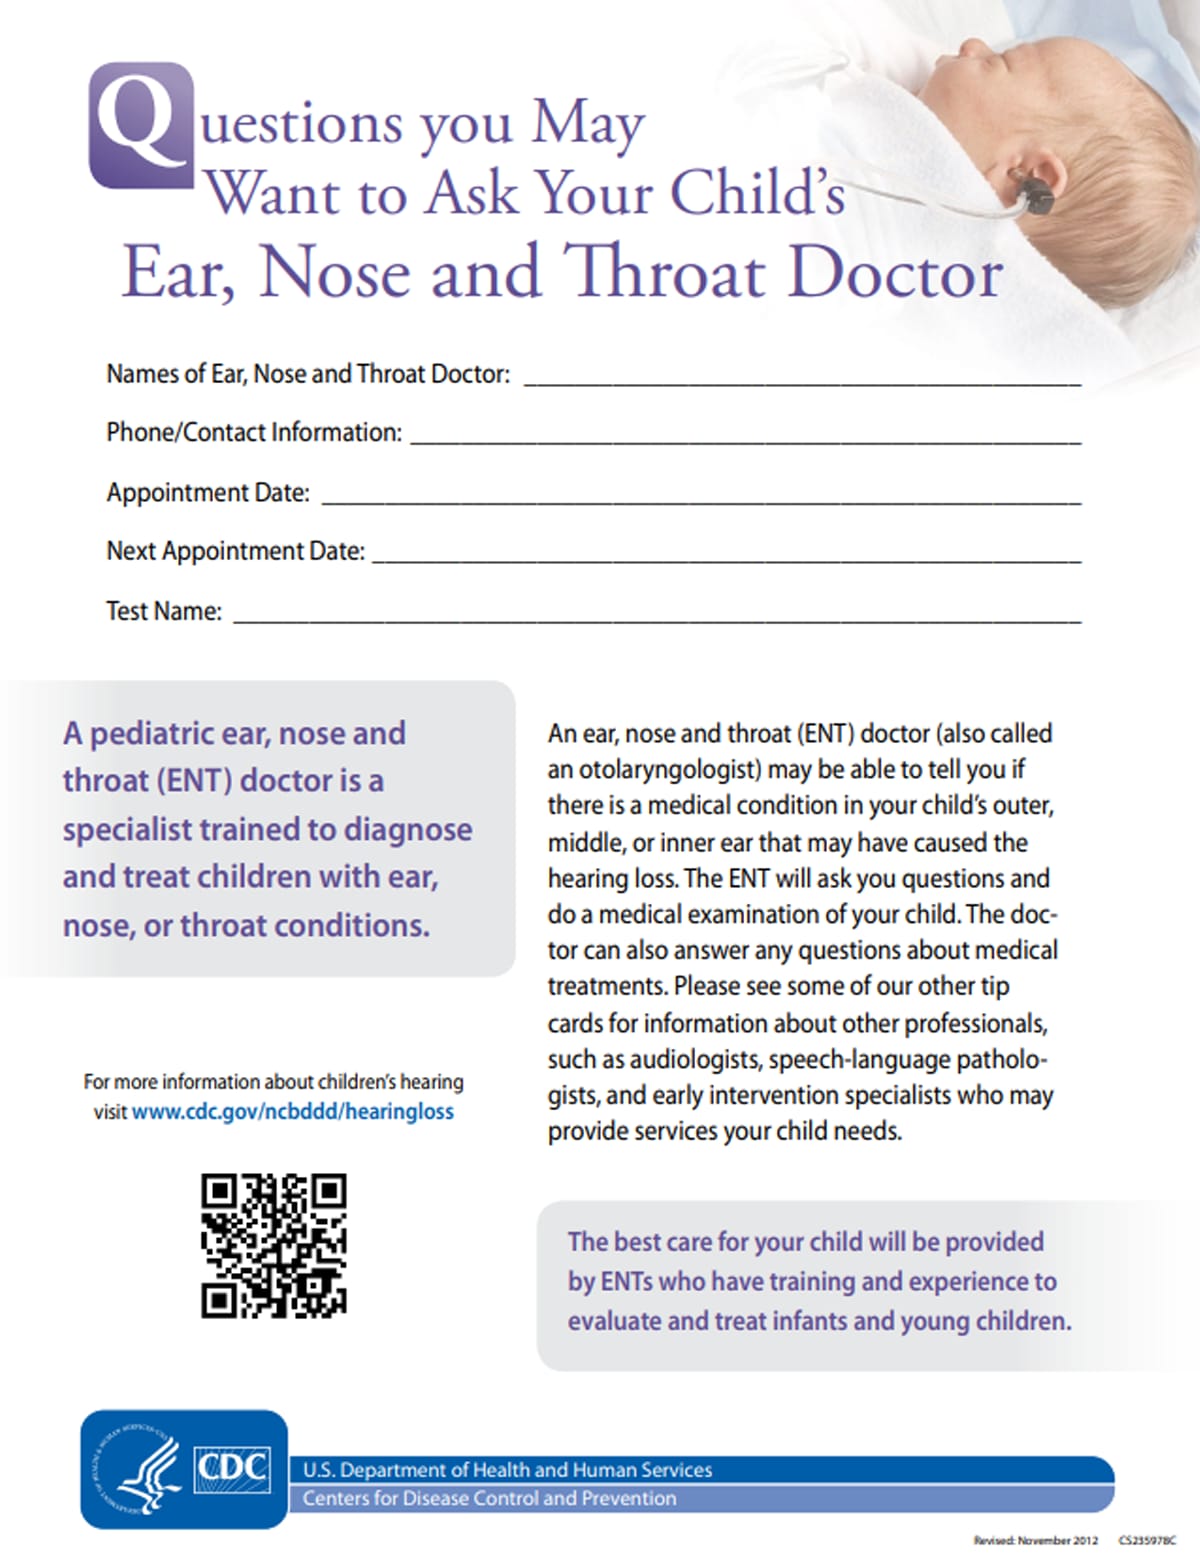 PDF preview - Questions you may want to ask ear nose and throat